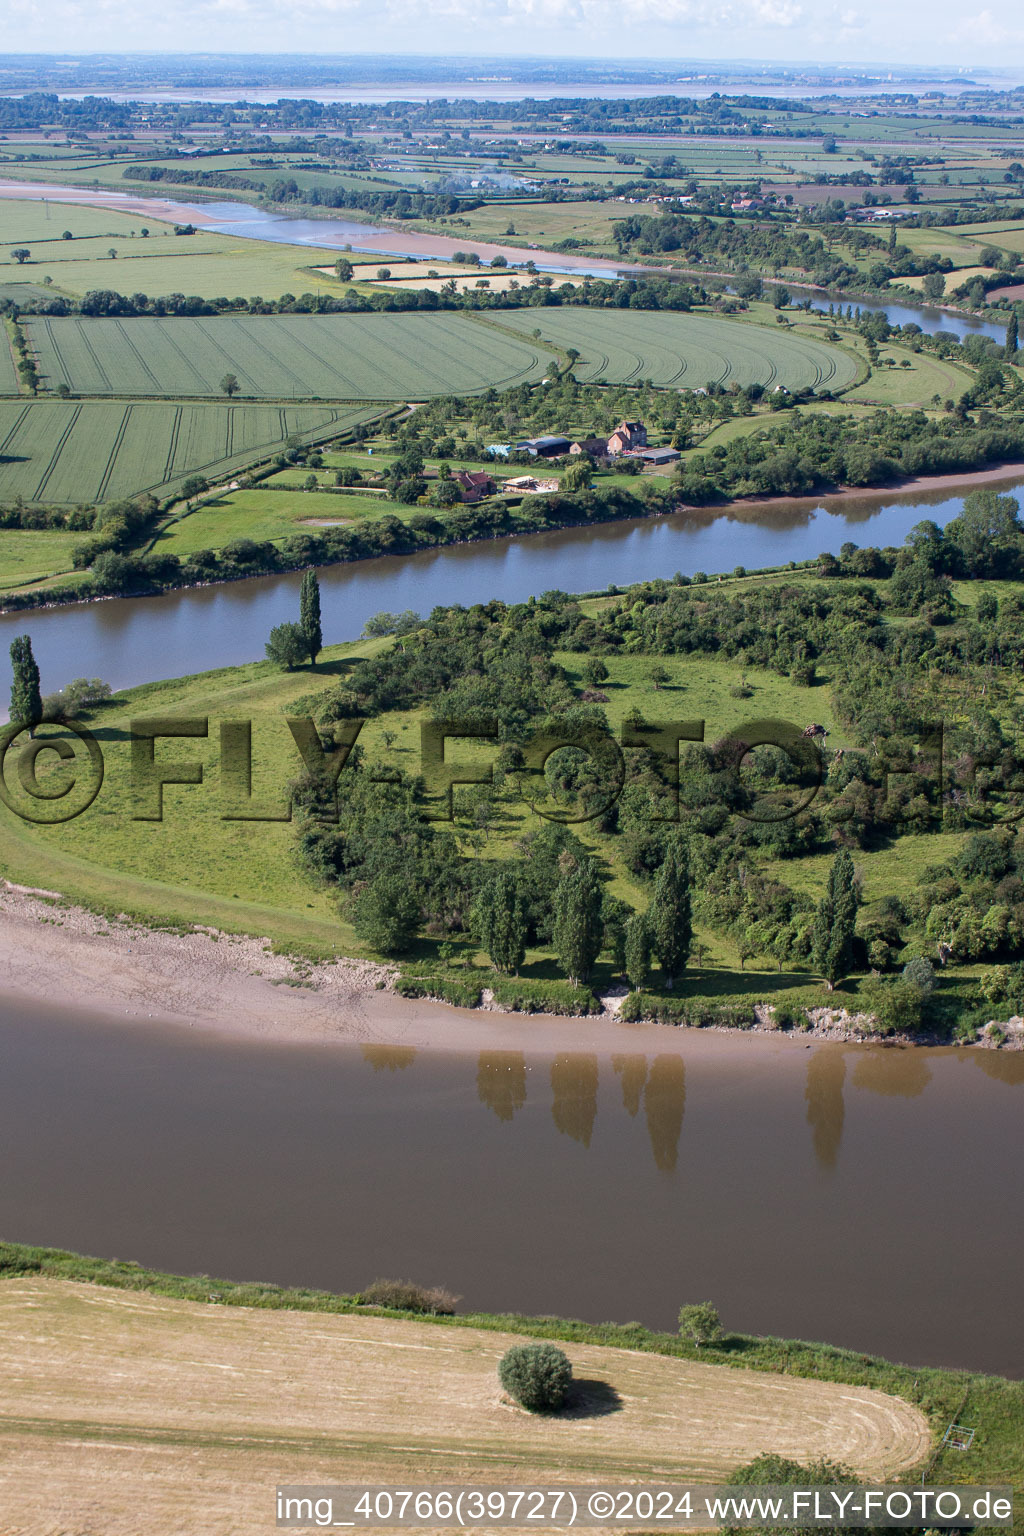 Aerial view of Knee of the River Severn near Oakle Street in Oakle Street in the state England, Great Britain